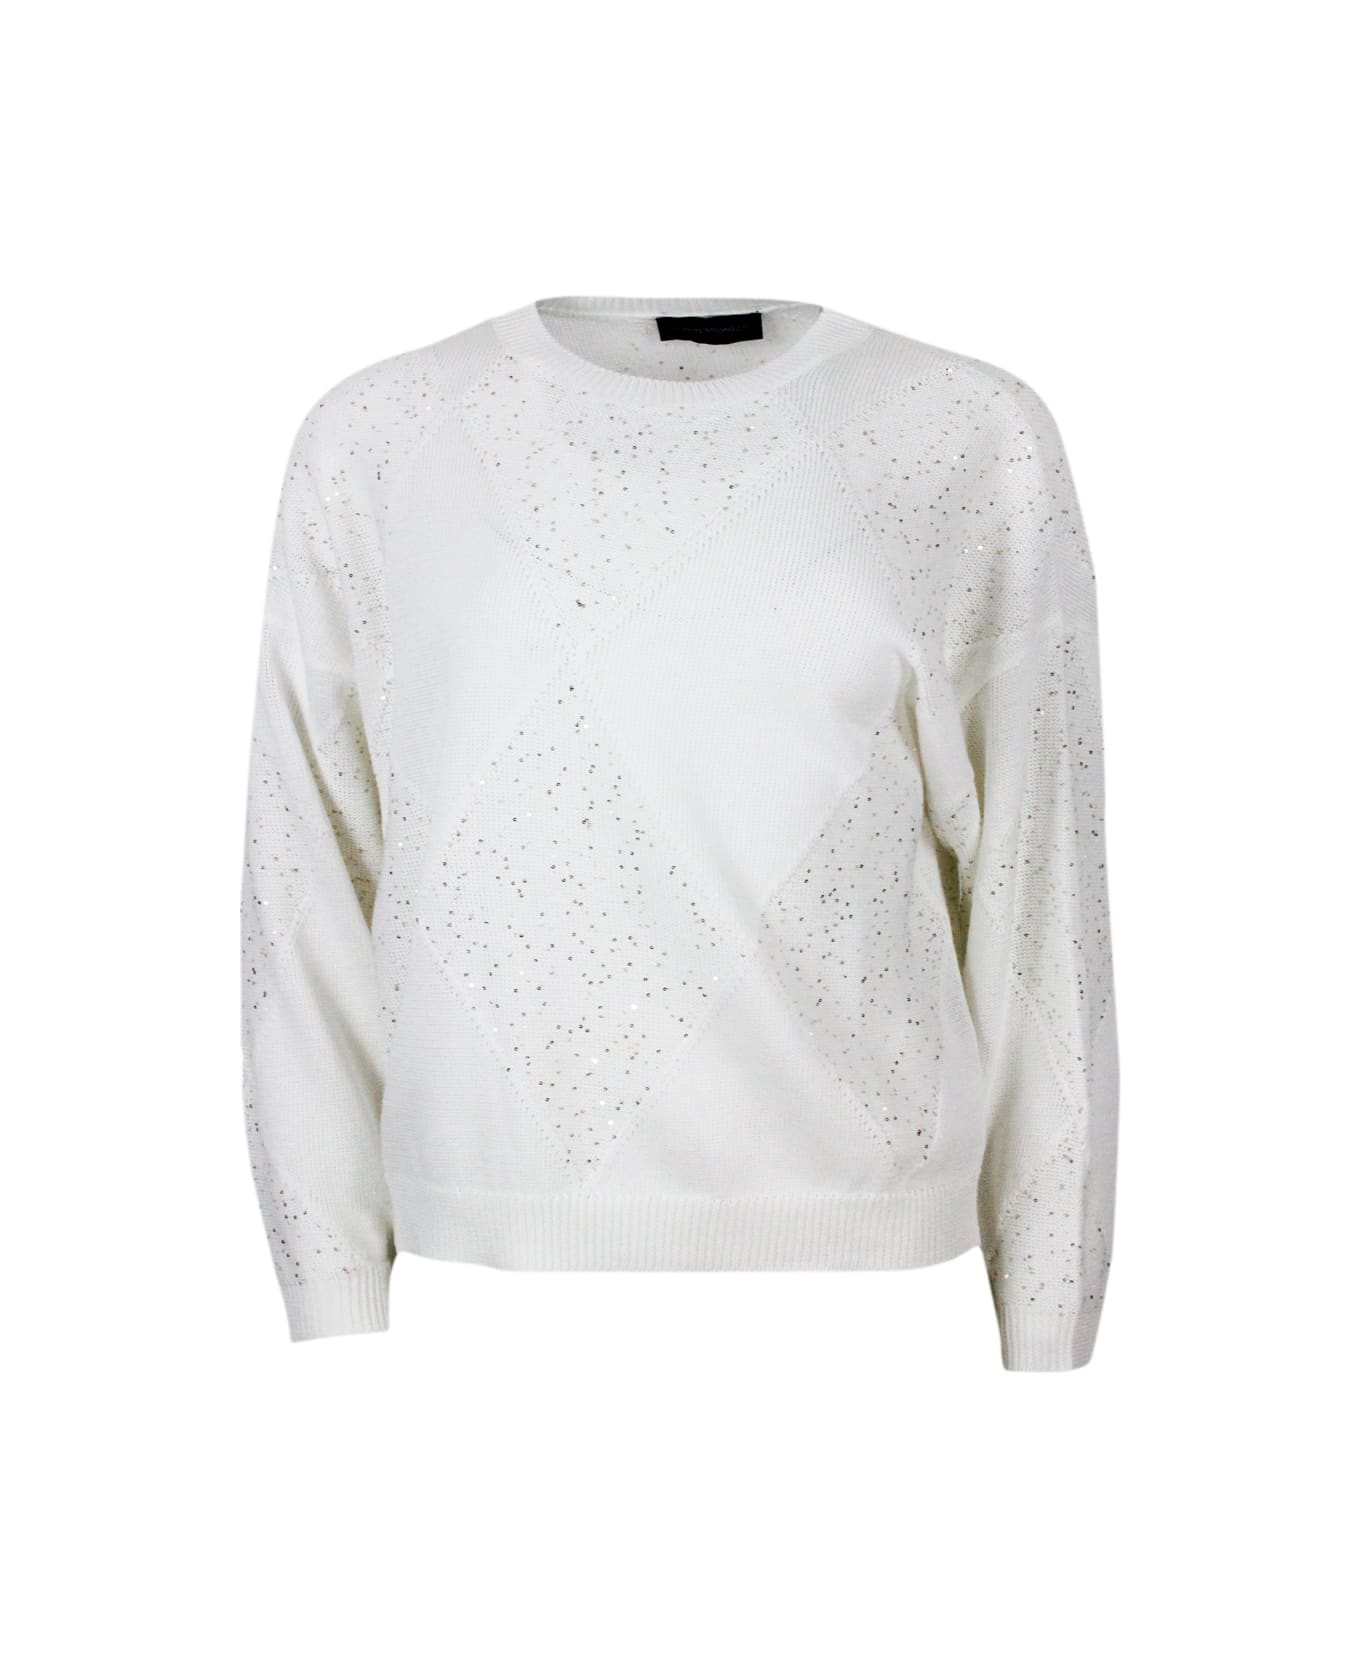 Lorena Antoniazzi Long-sleeved Crew-neck Sweater In Cotton Thread With Diamond Pattern Embellished With Microsequins - White